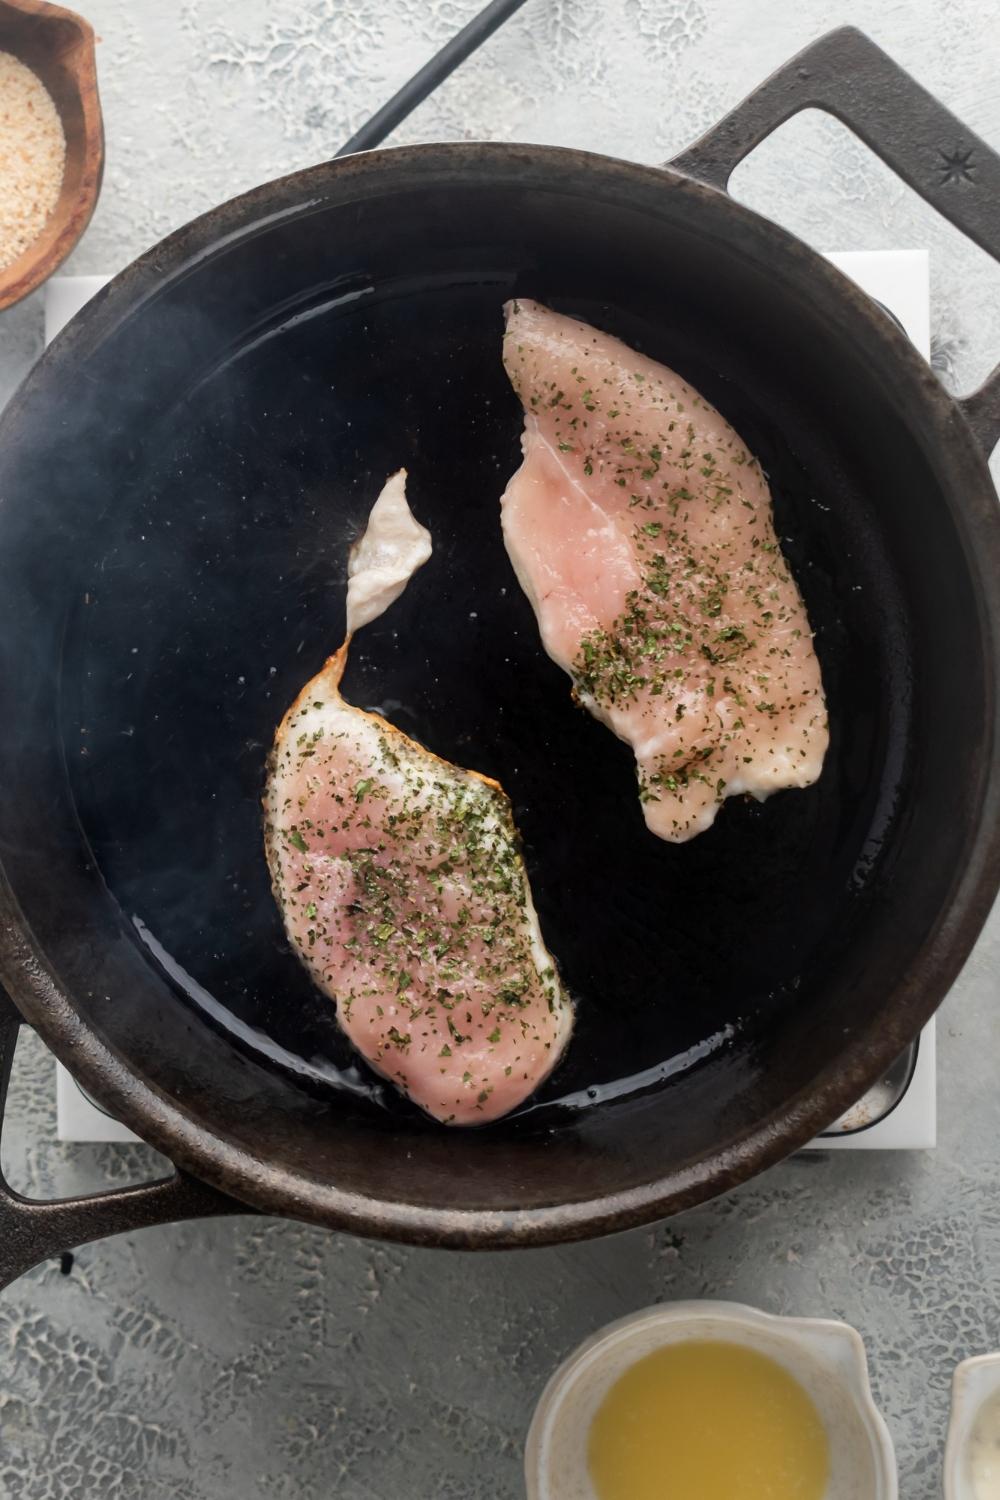 Two pieces of chicken breast in a skillet.